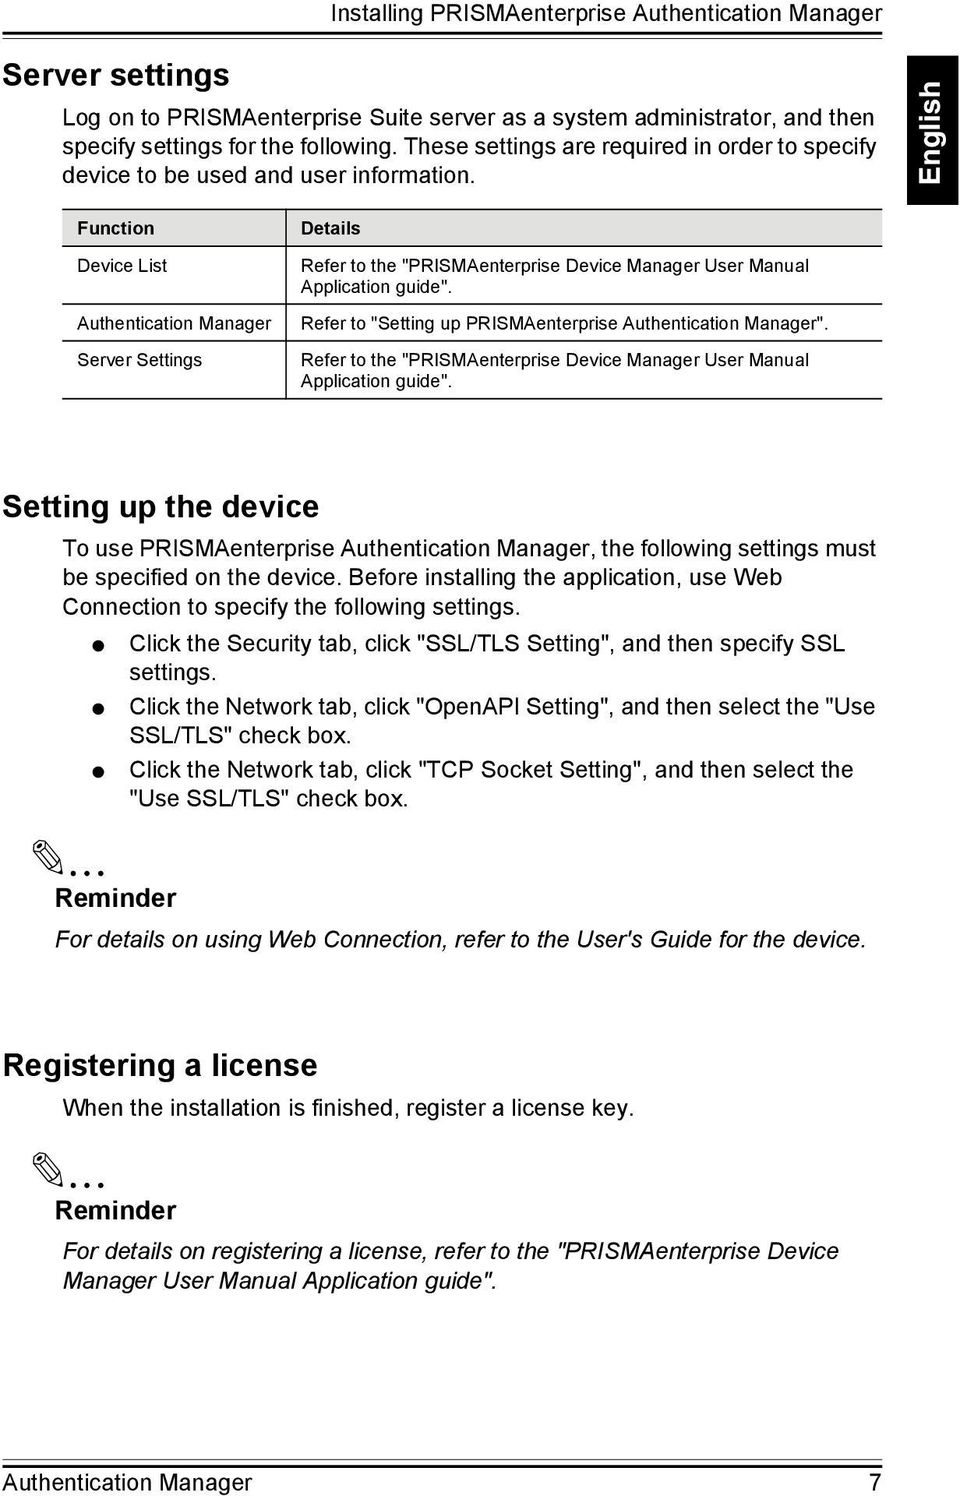 English Function Device List Authentication Manager Server Settings Details Refer to the "PRISMAenterprise Device Manager User Manual Application guide".